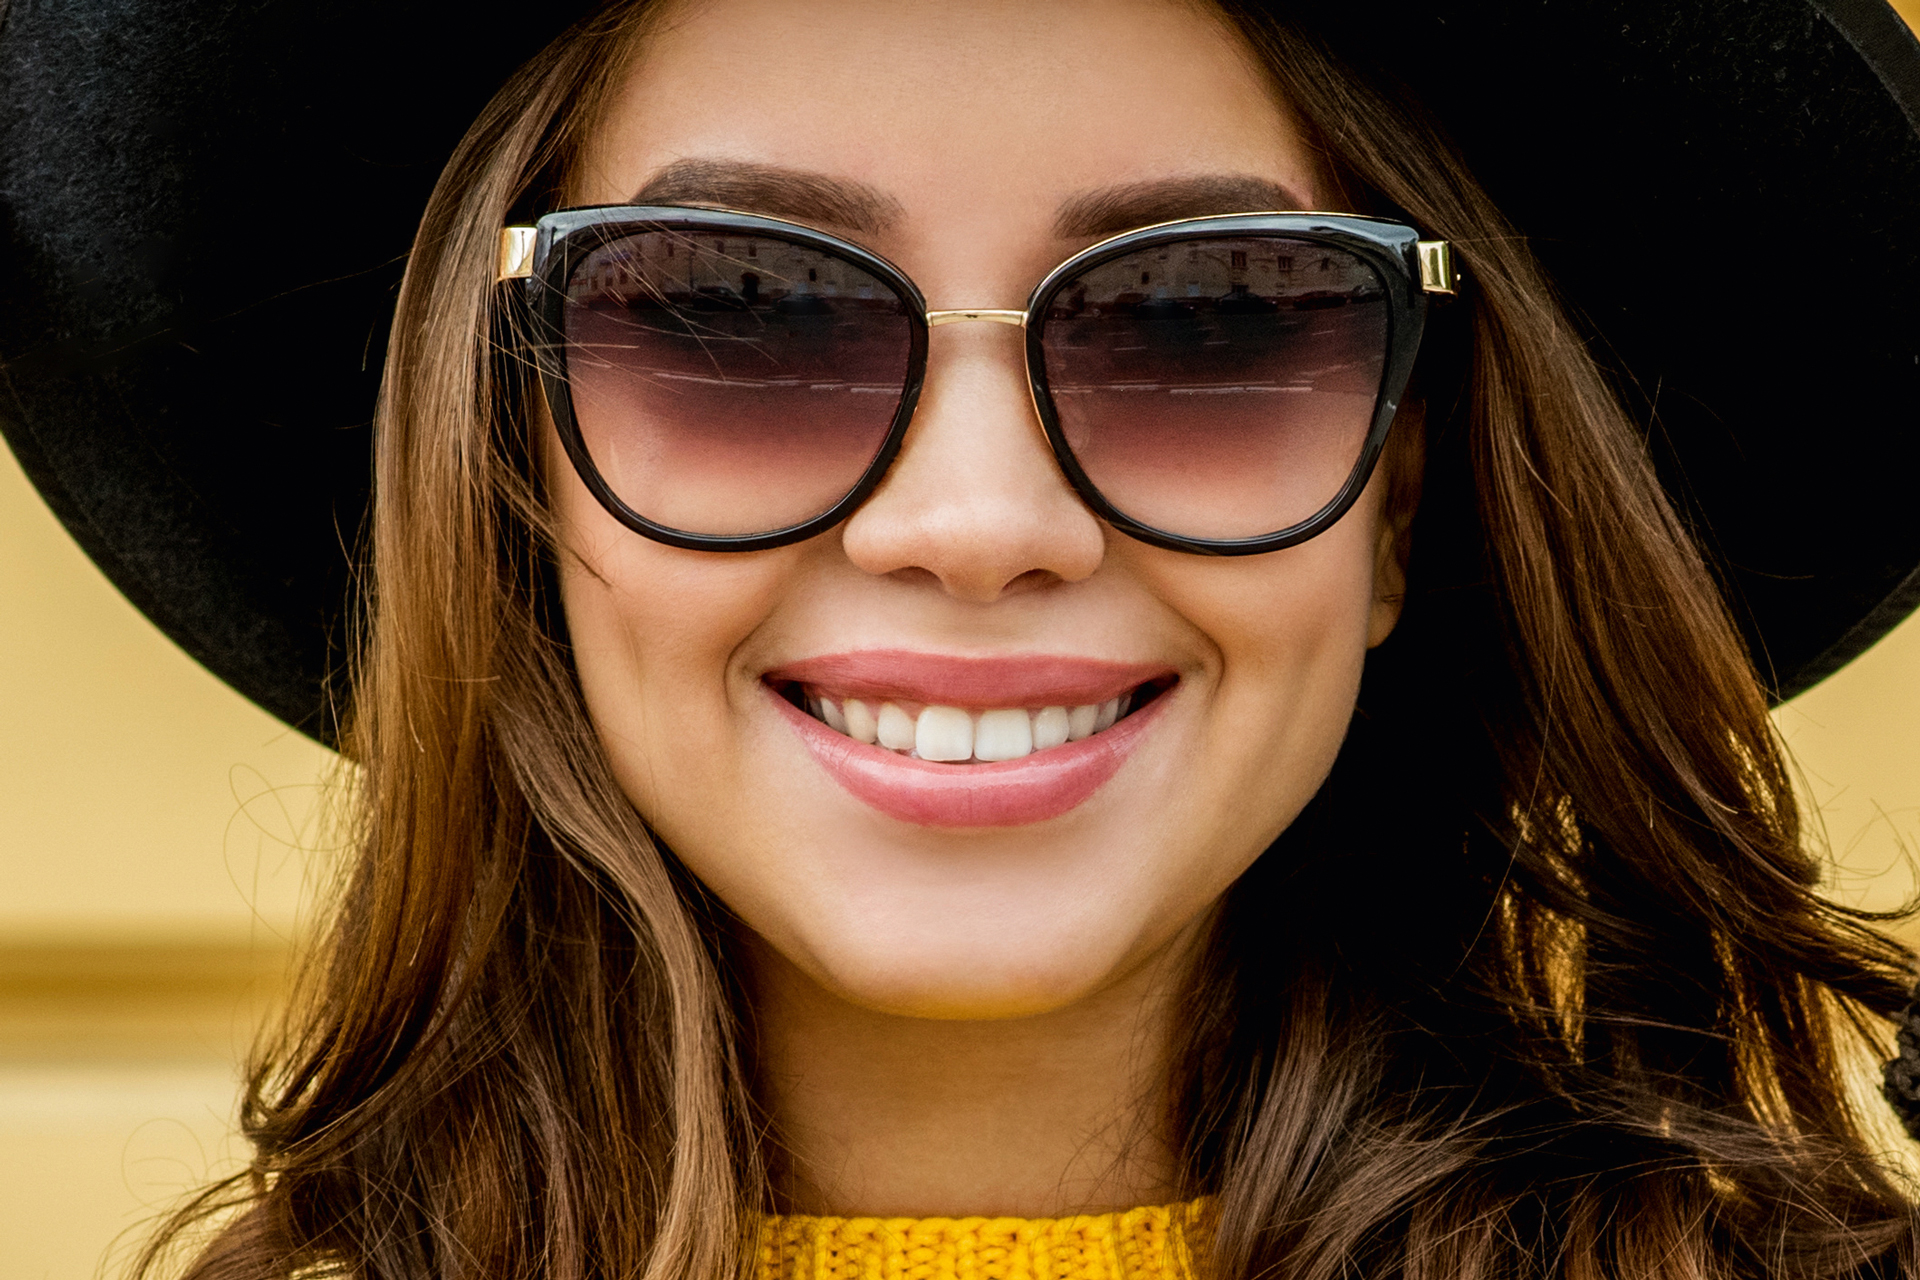 Sunglasses are more than just a fashion accessory – they should protect your eyes from harmful UV rays.